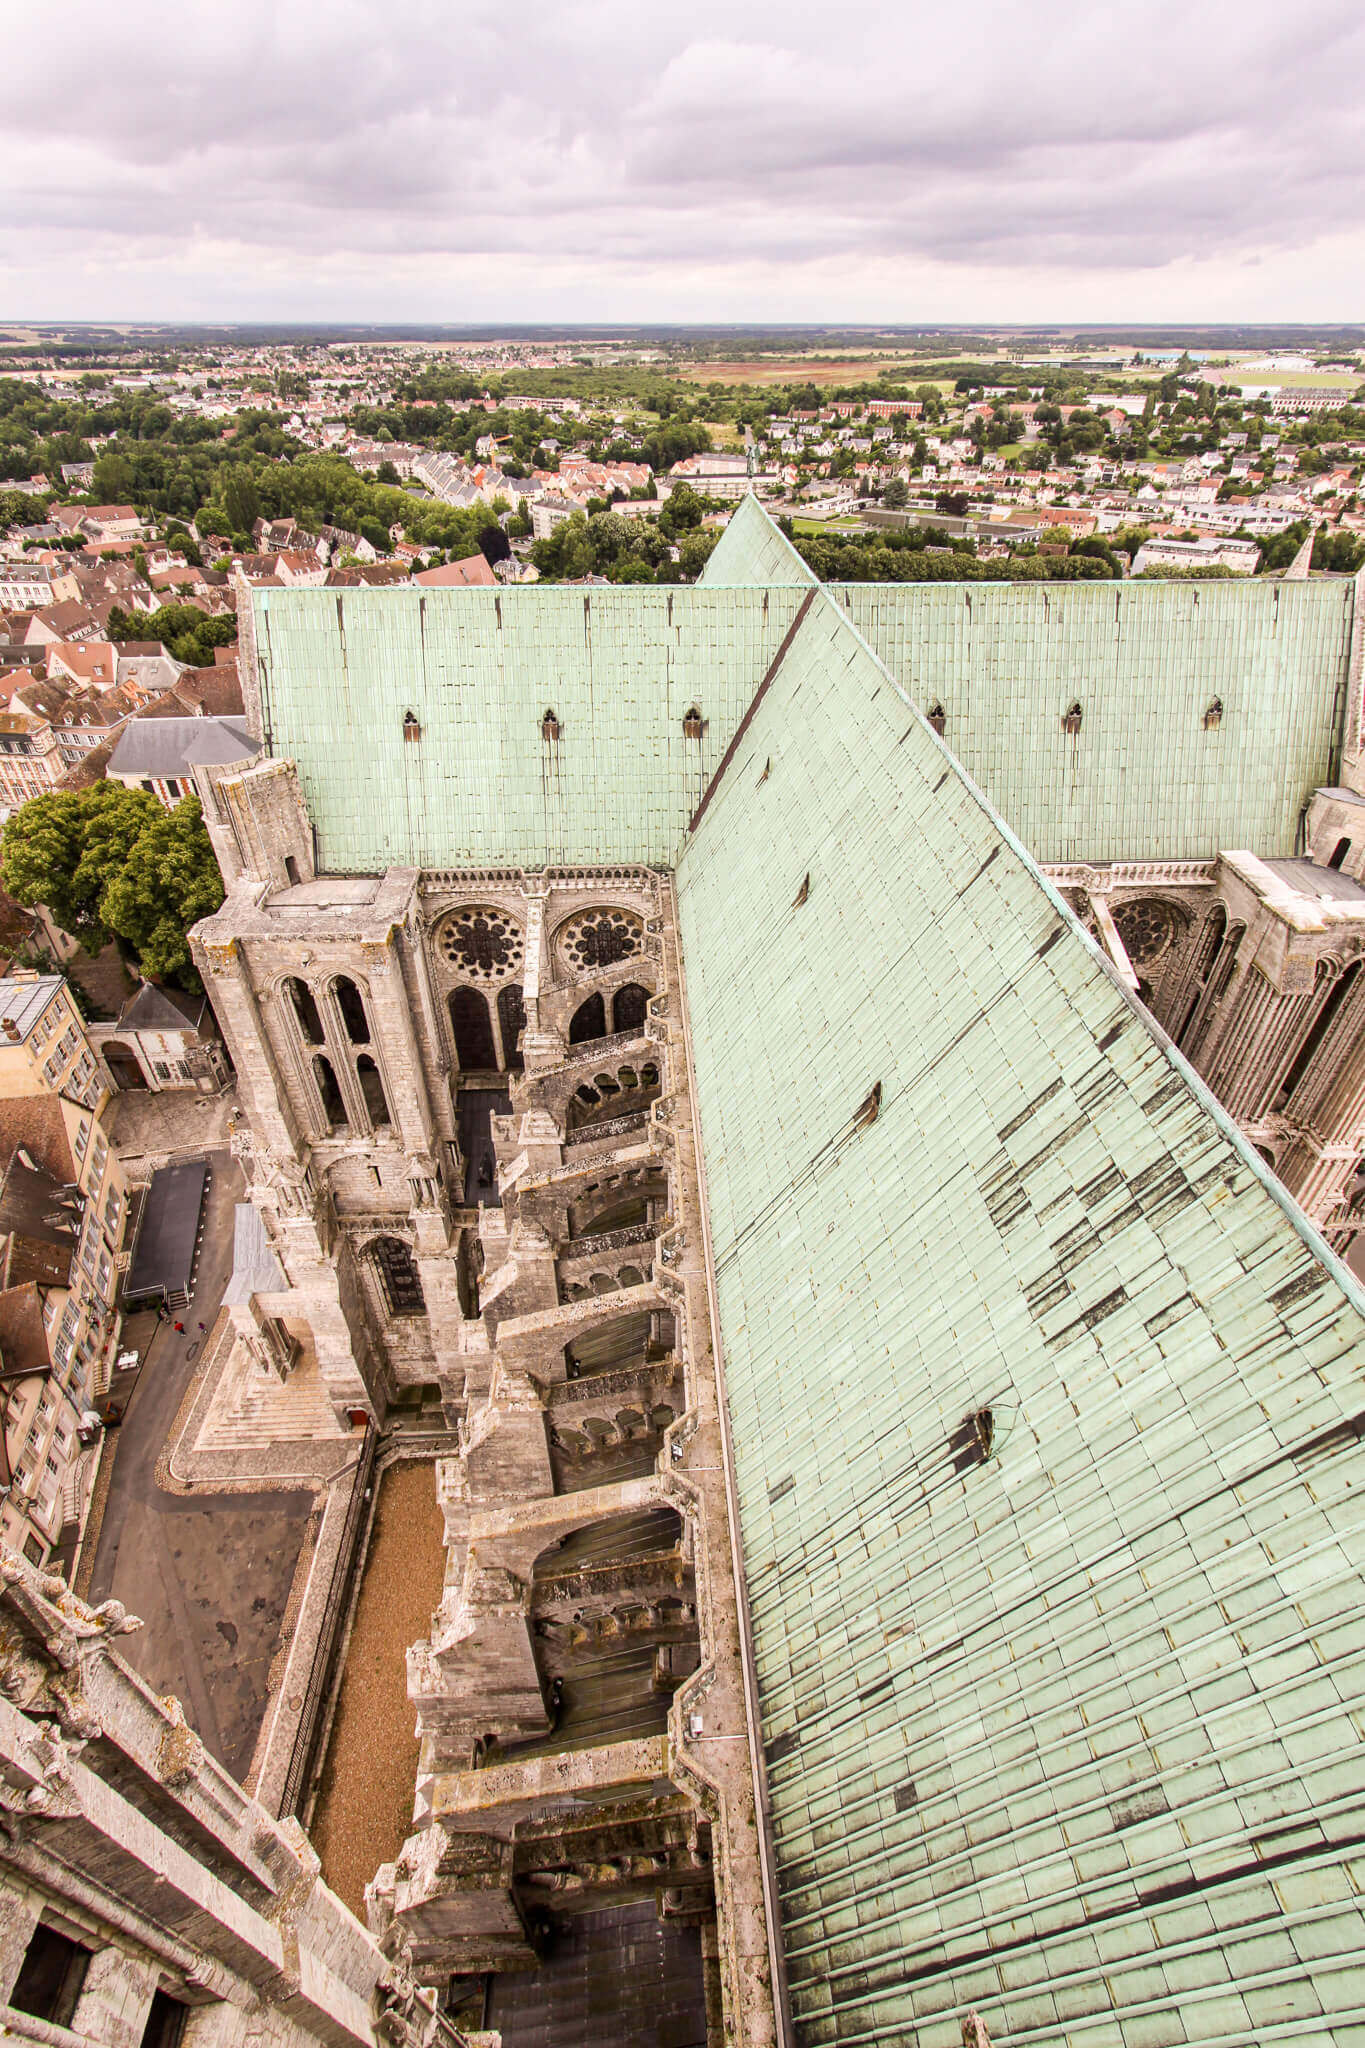 The roof of the Chartres Cathedral as seen from the bell tower